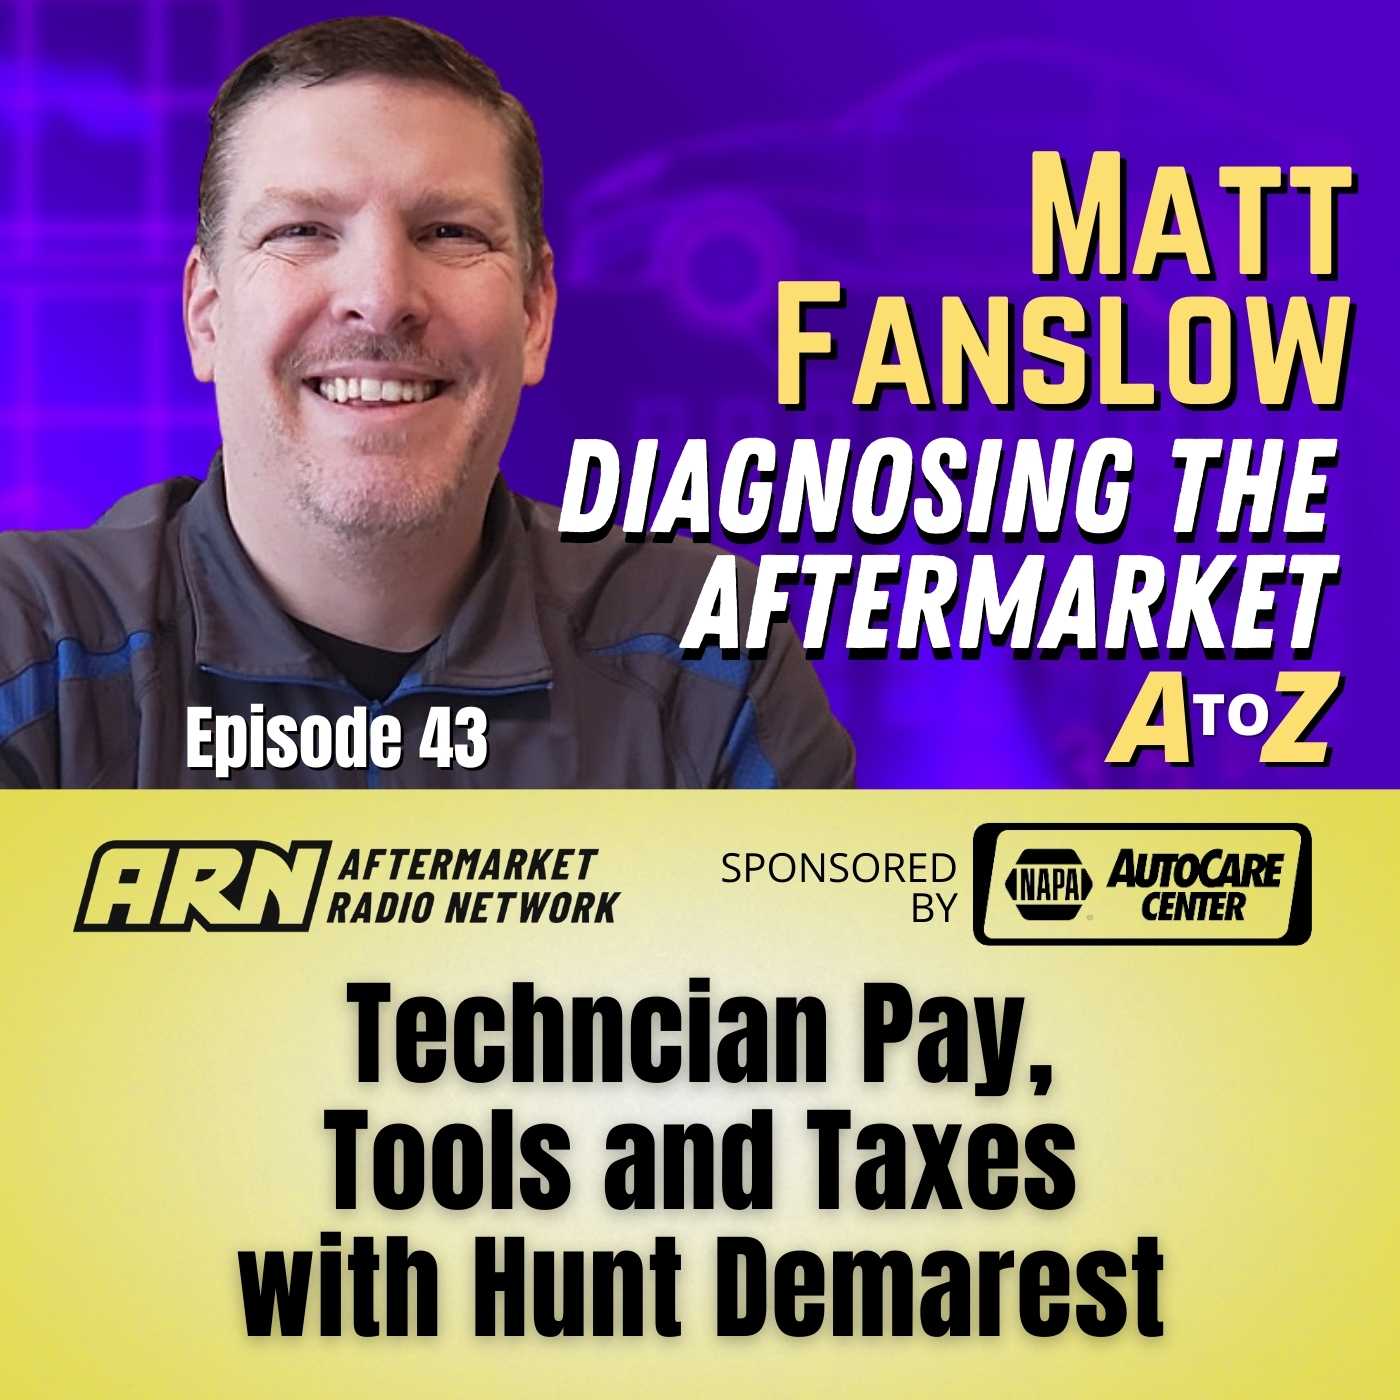 Artwork for podcast Matt Fanslow - Diagnosing the Aftermarket A to Z